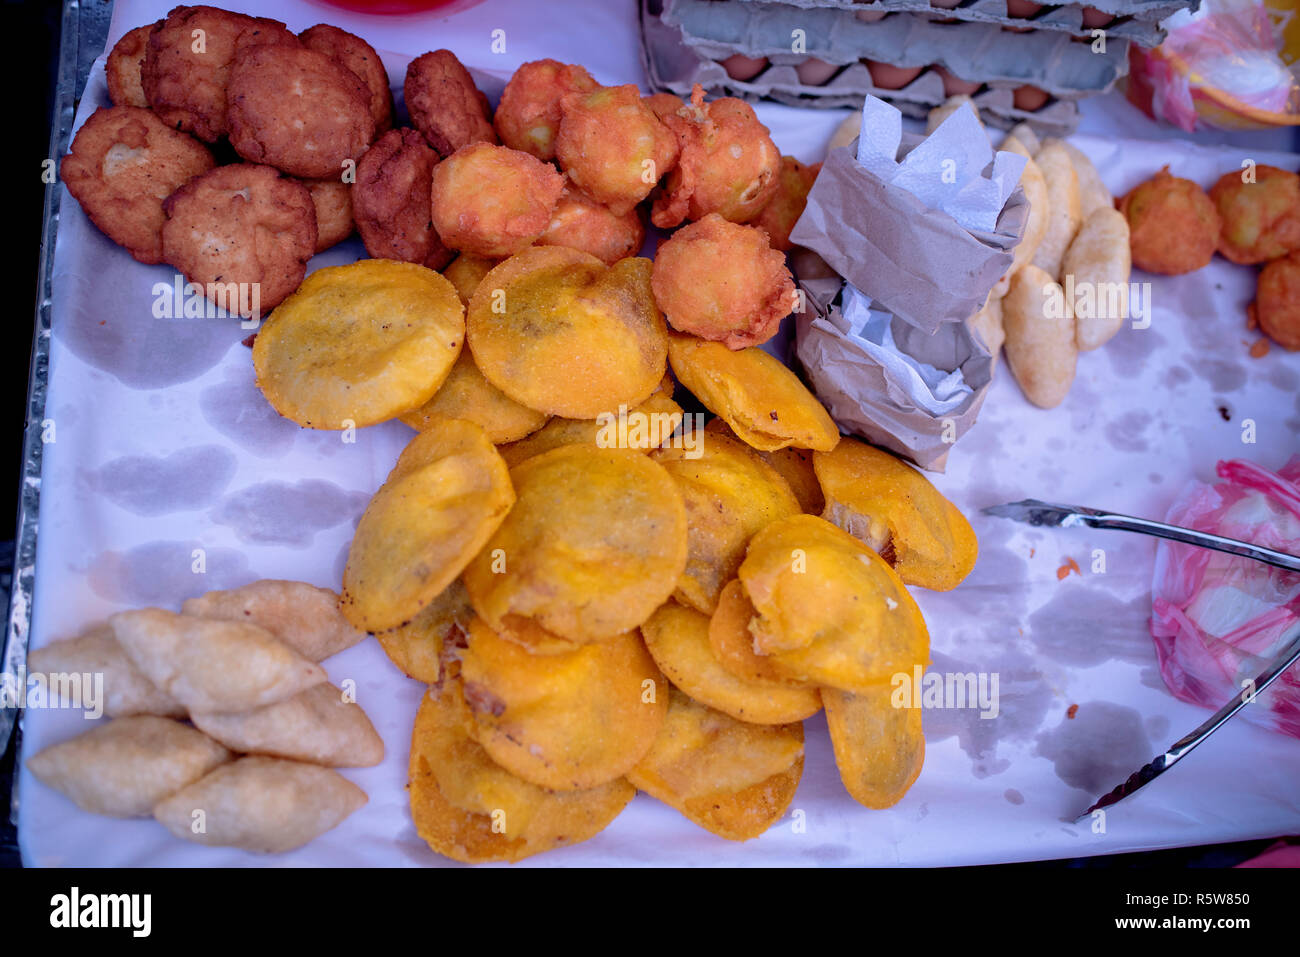 Fried street food for sale in the old town of Cartagena de Indias, Colombia. Yuca, potato, patacones and eggs. Oct 2018 Stock Photo